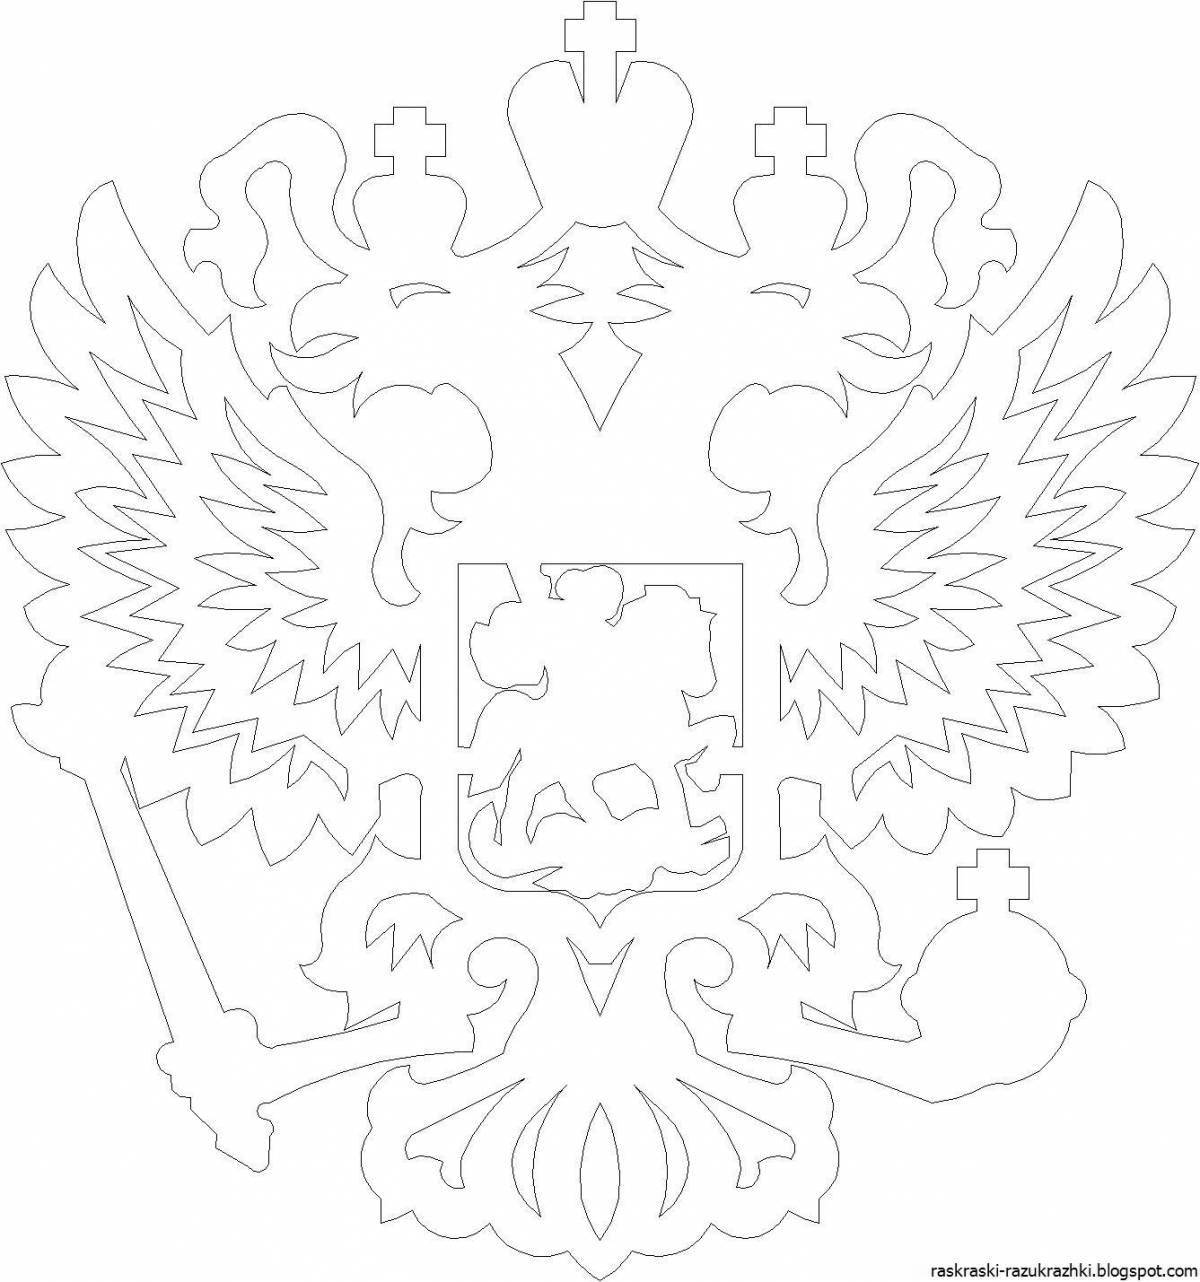 Fun coat of arms of the russian federation for students